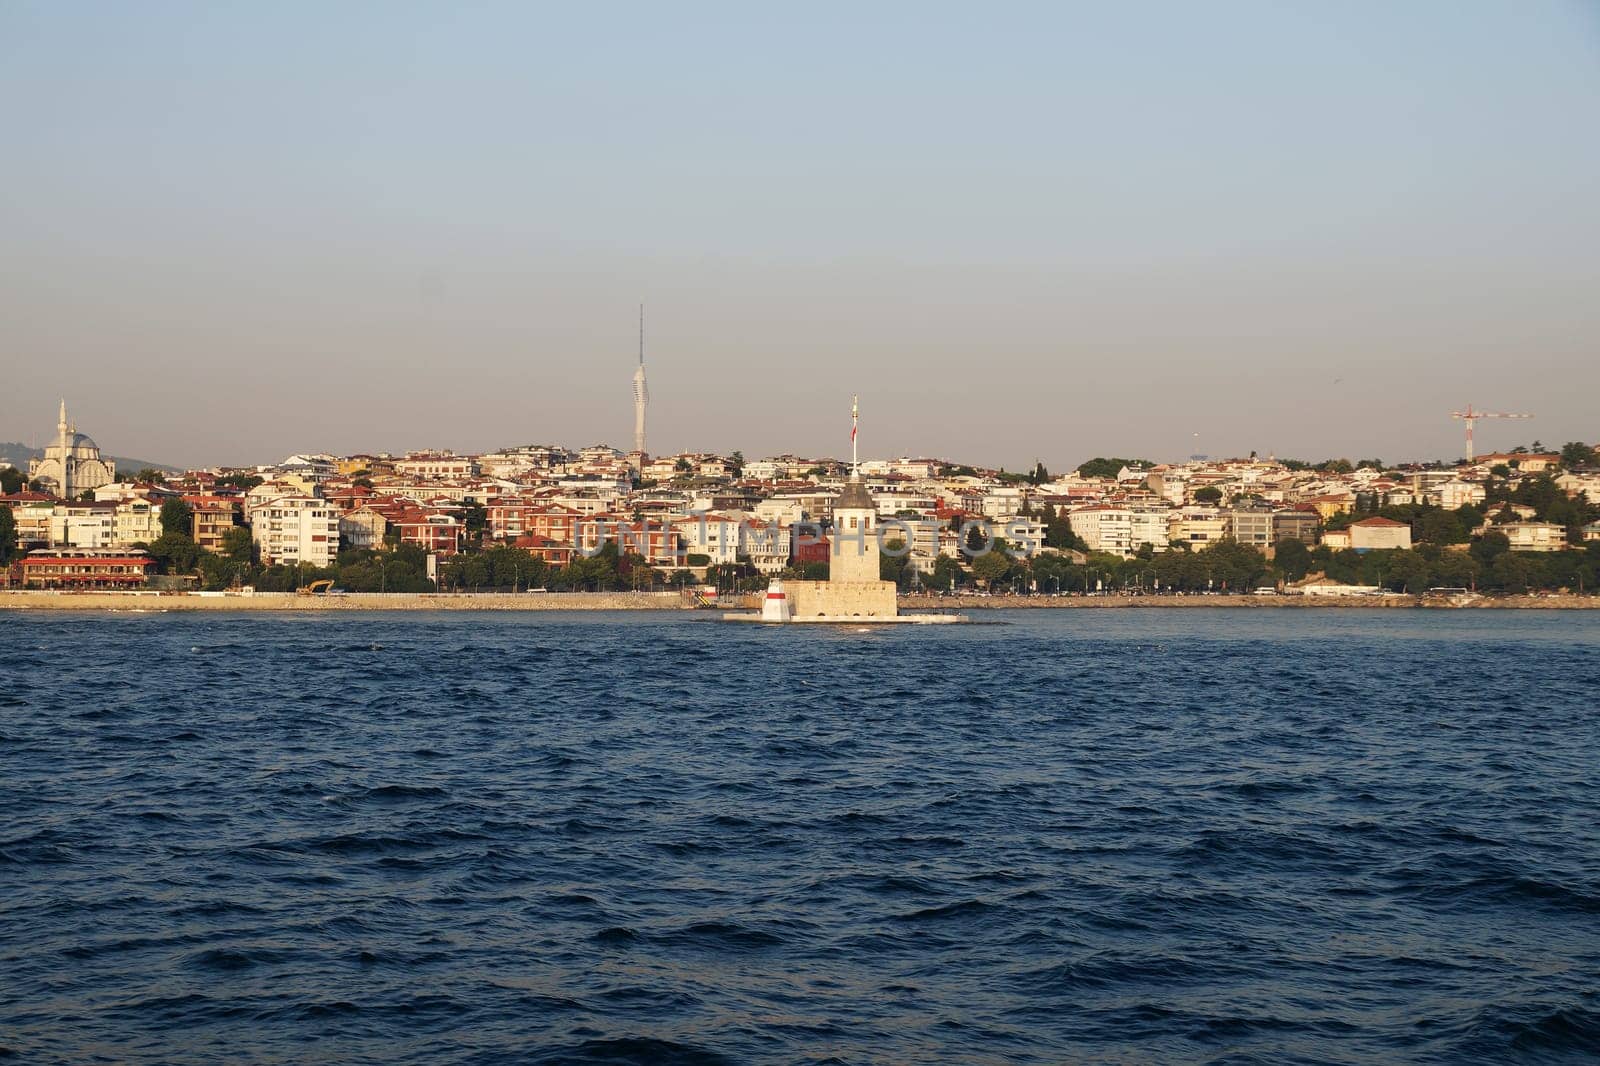 view of the Istanbul coast from the sea on a sunny day by Annado